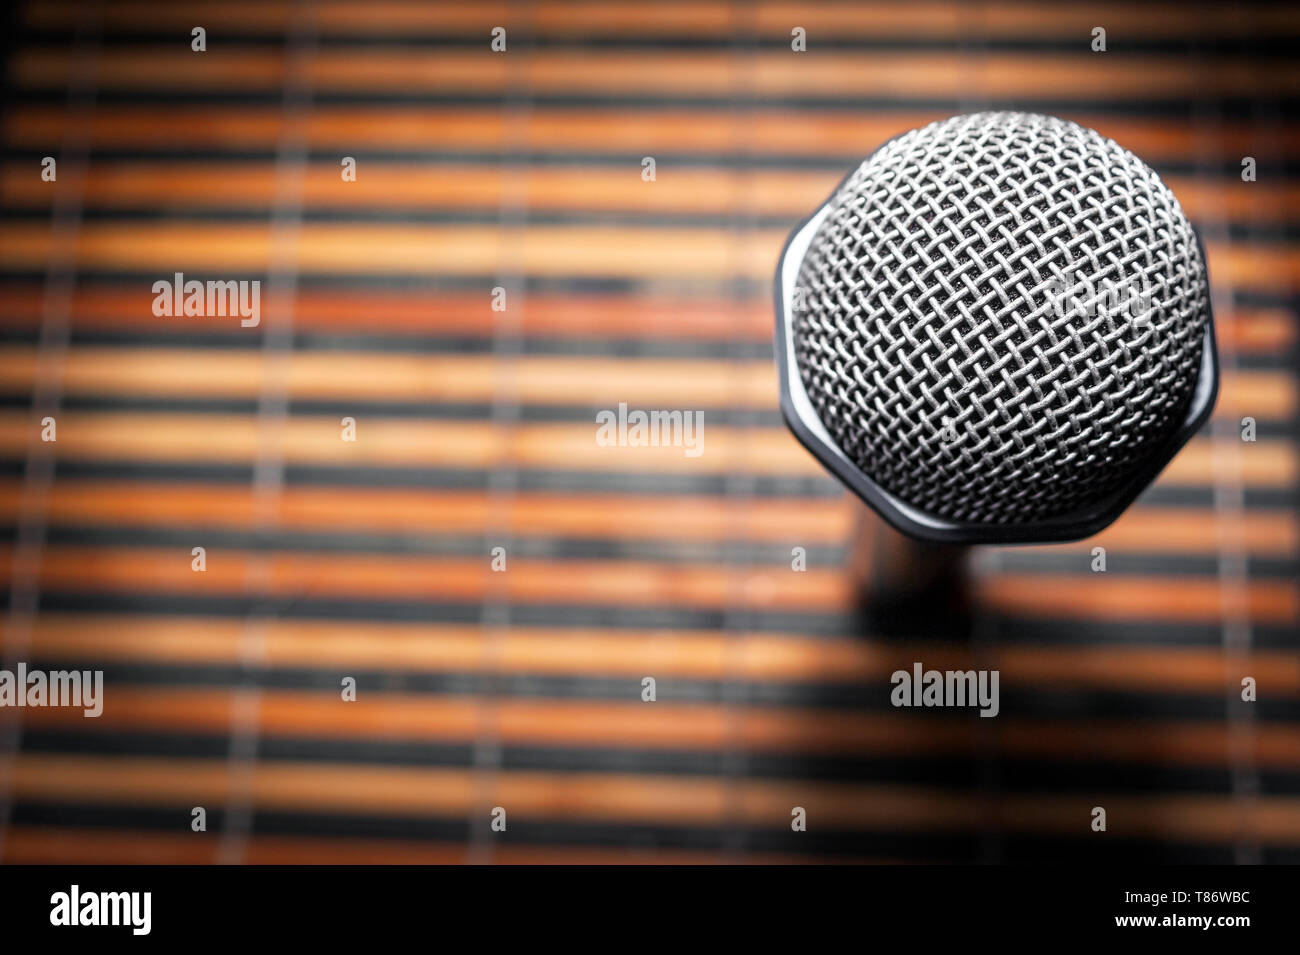 Top-Down View of A Microphone Head and Silver Grille on A Striped Yellow and Black Bamboo Mat Background. Karaoke Bar, Party Concept. Copy Space. Stock Photo